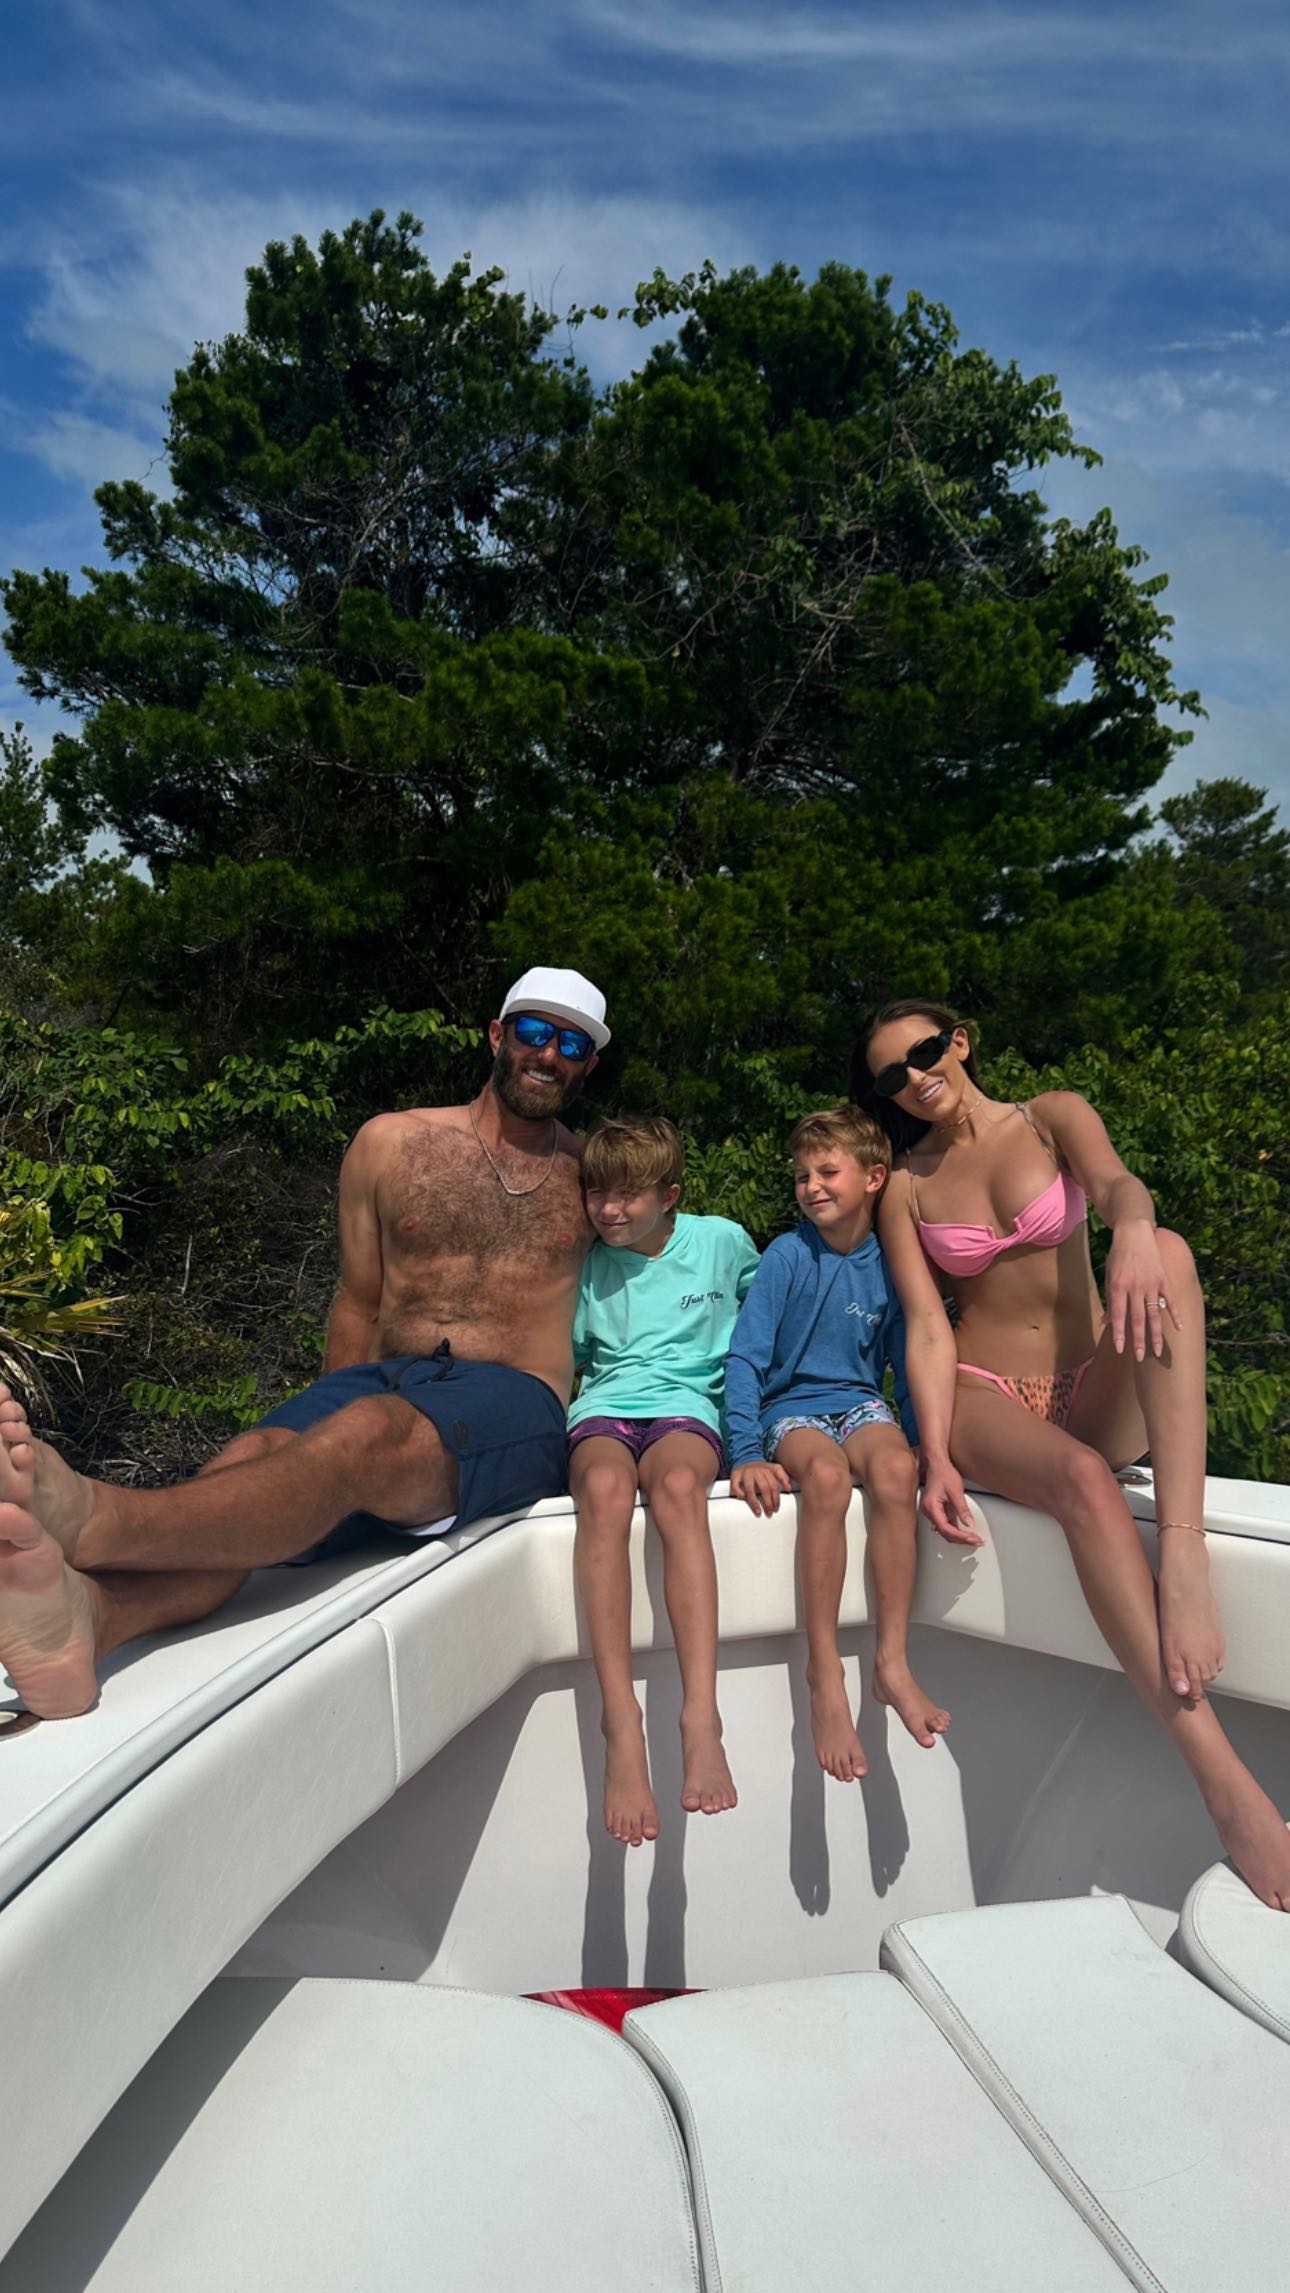 , Paulina Gretzky shows off incredible beach body in tiny bikini on boat during holiday with Dustin Johnson